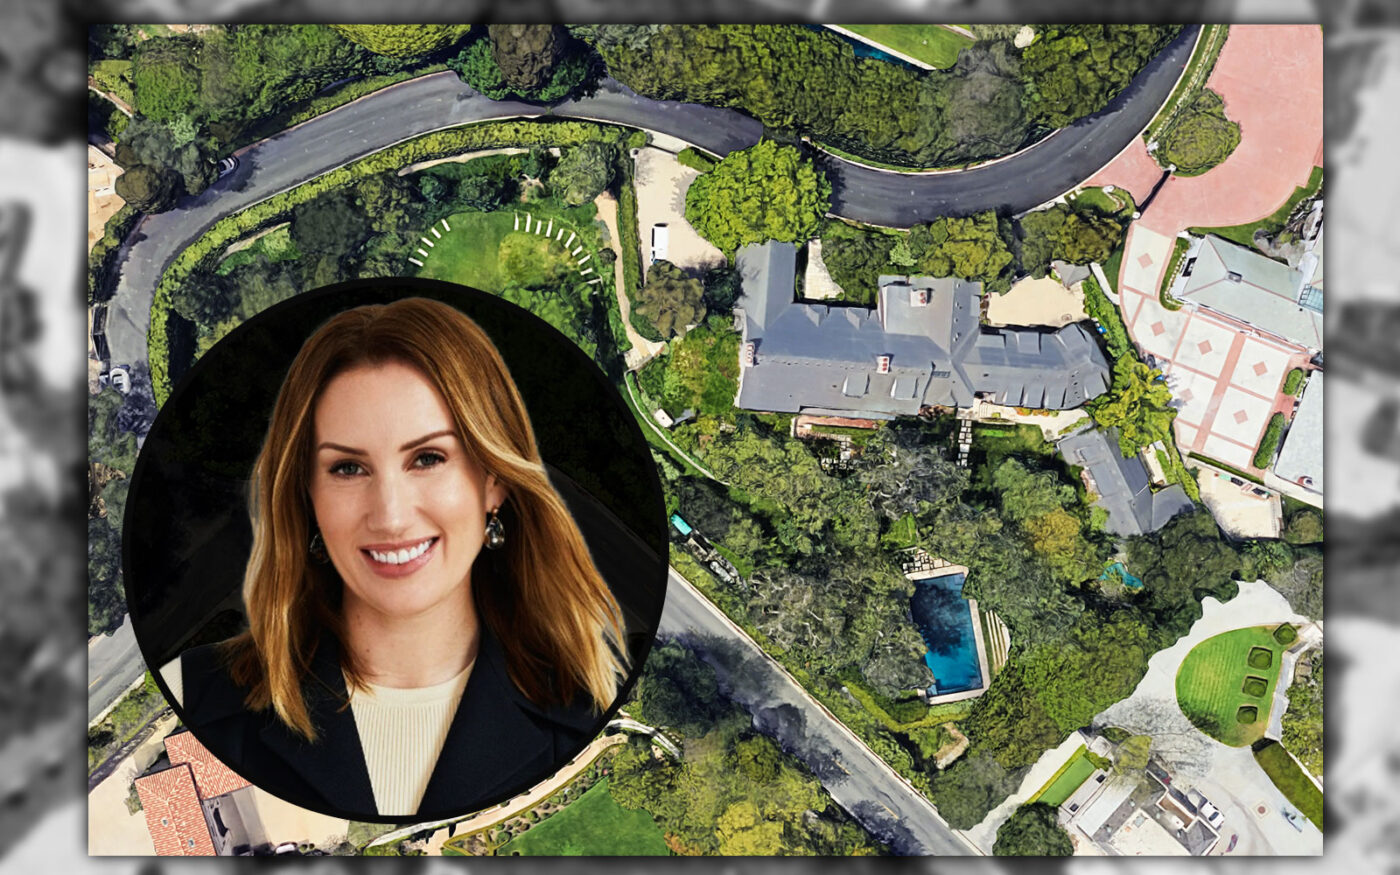 Katherine Power buys century-old Bel-Air estate for $27M — $16M off initial ask